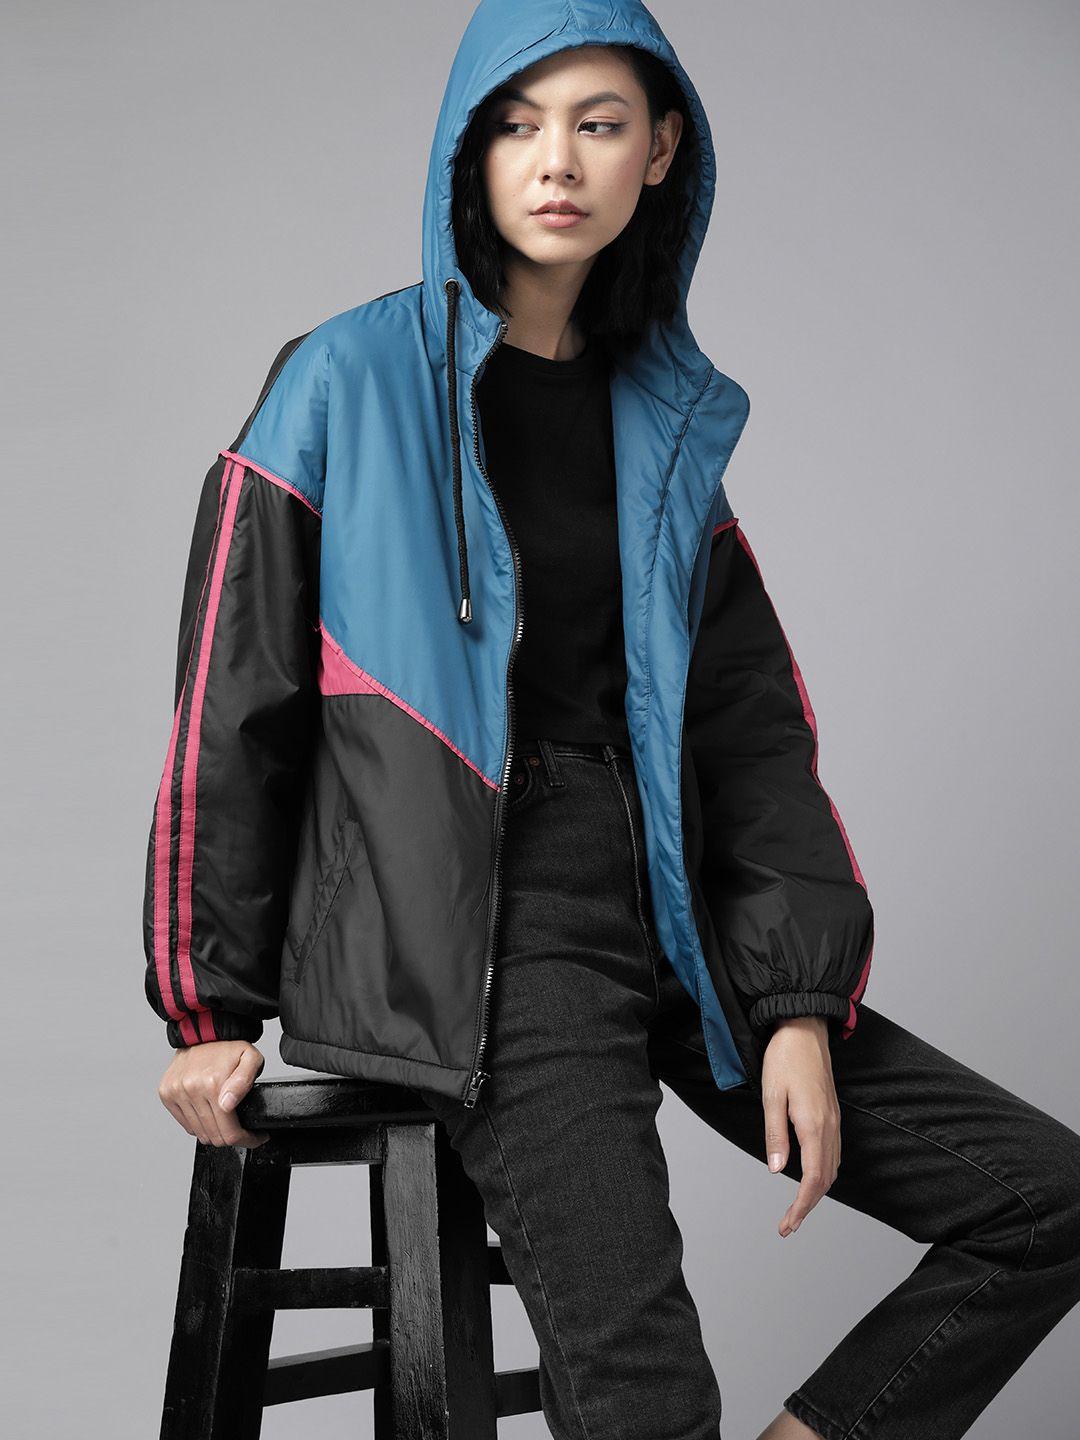 the roadster lifestyle co. women colourblocked padded jacket